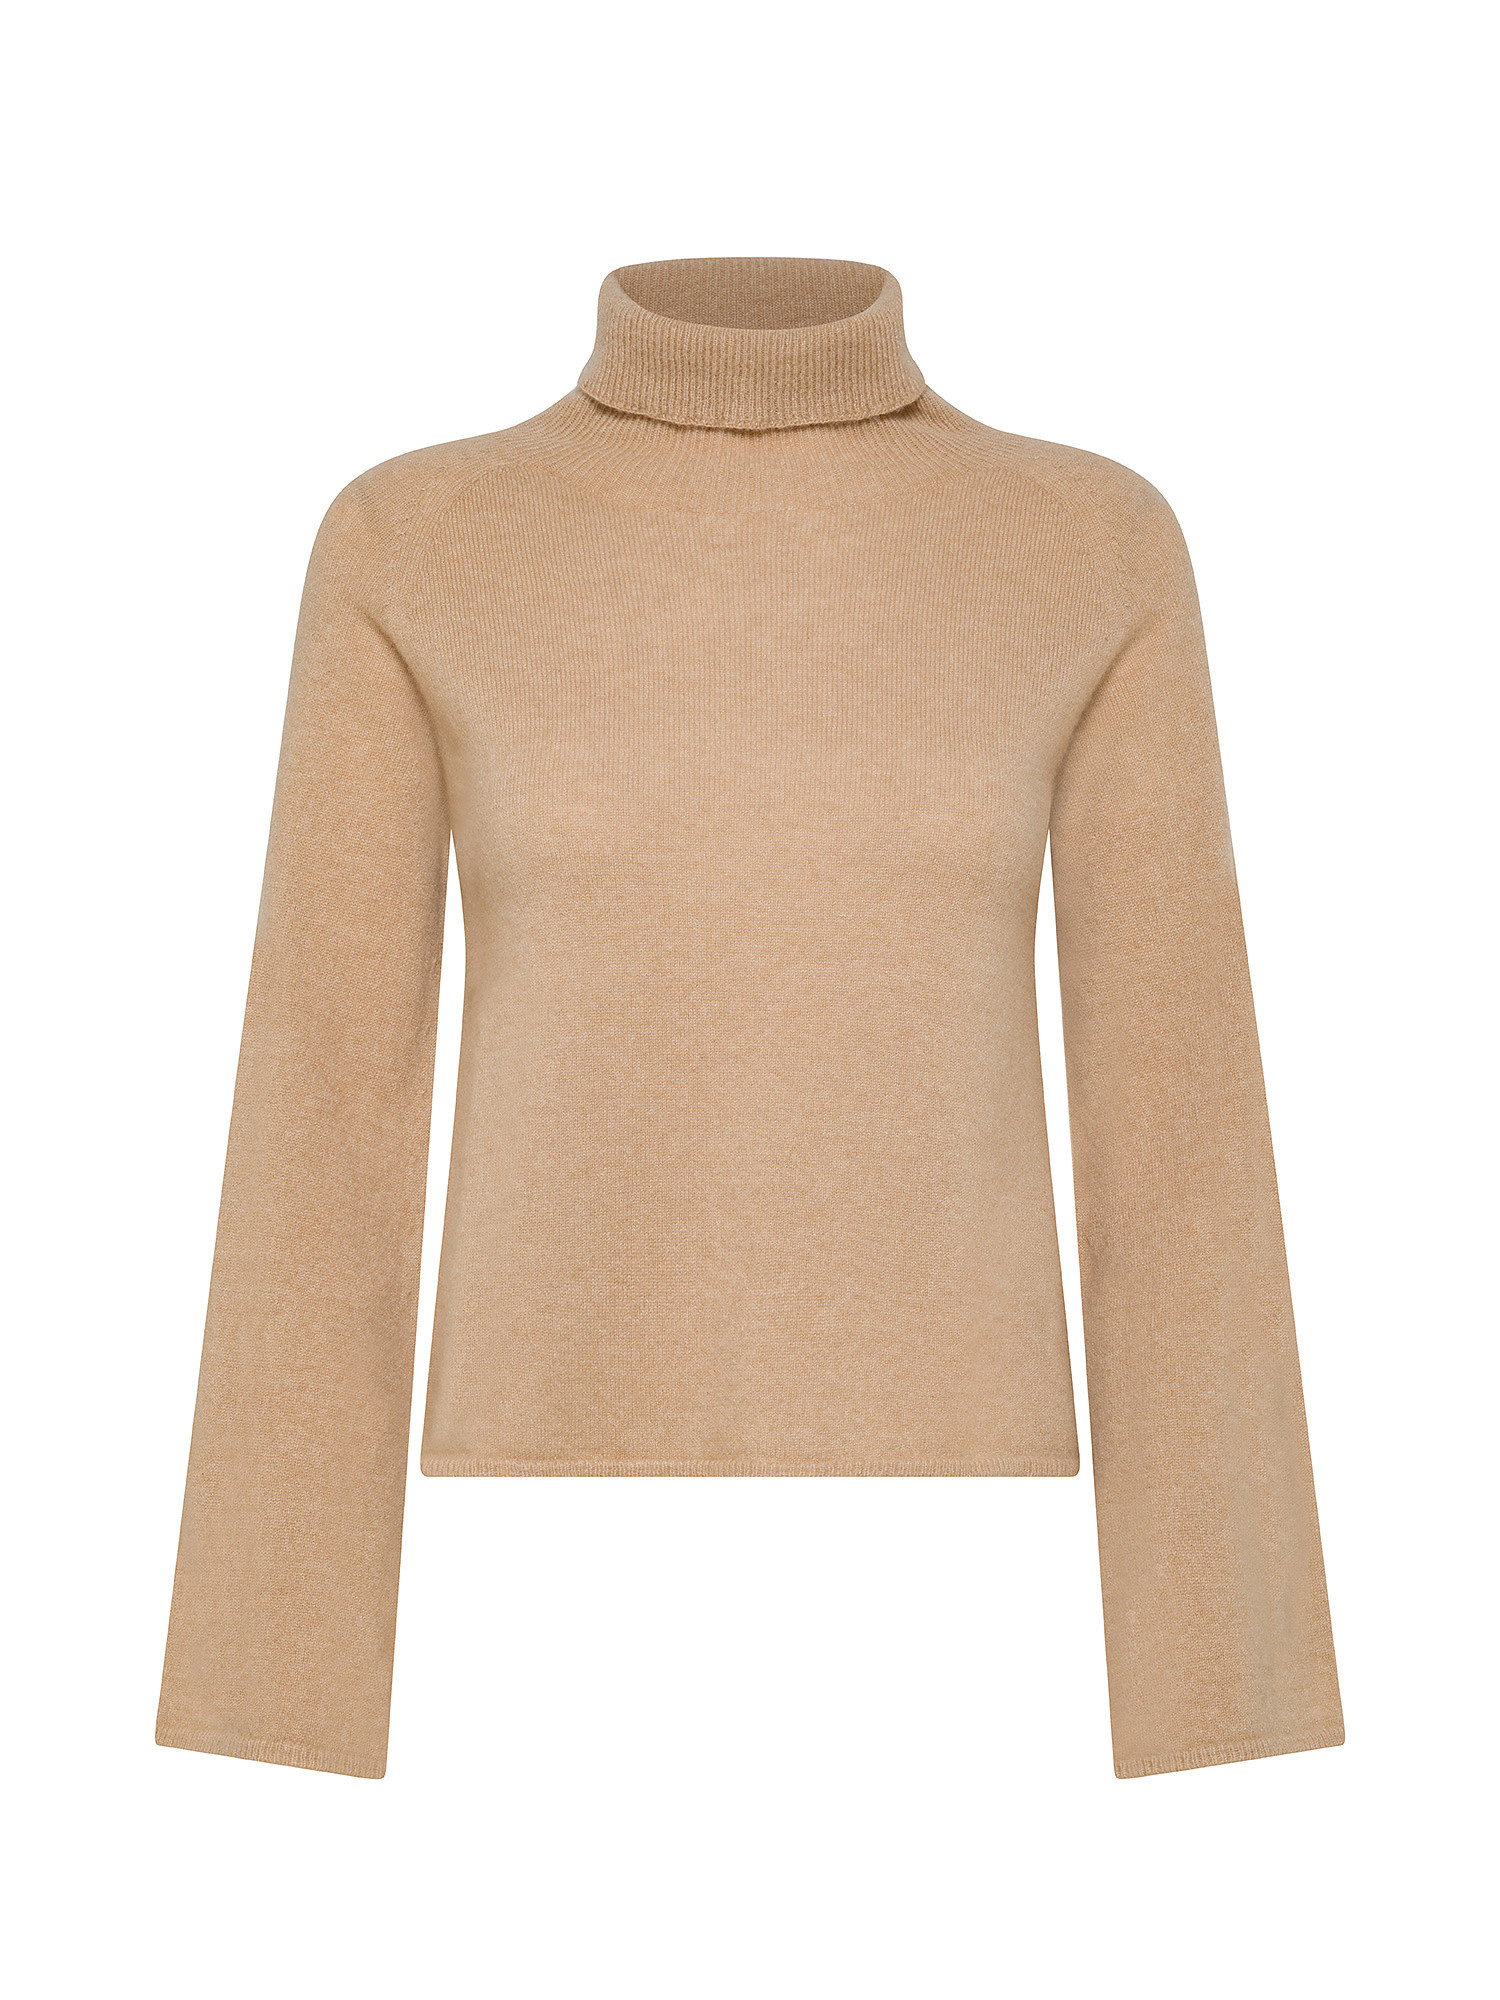 Coin Cashmere - Turtleneck in pure premium cashmere, Grey, large image number 0